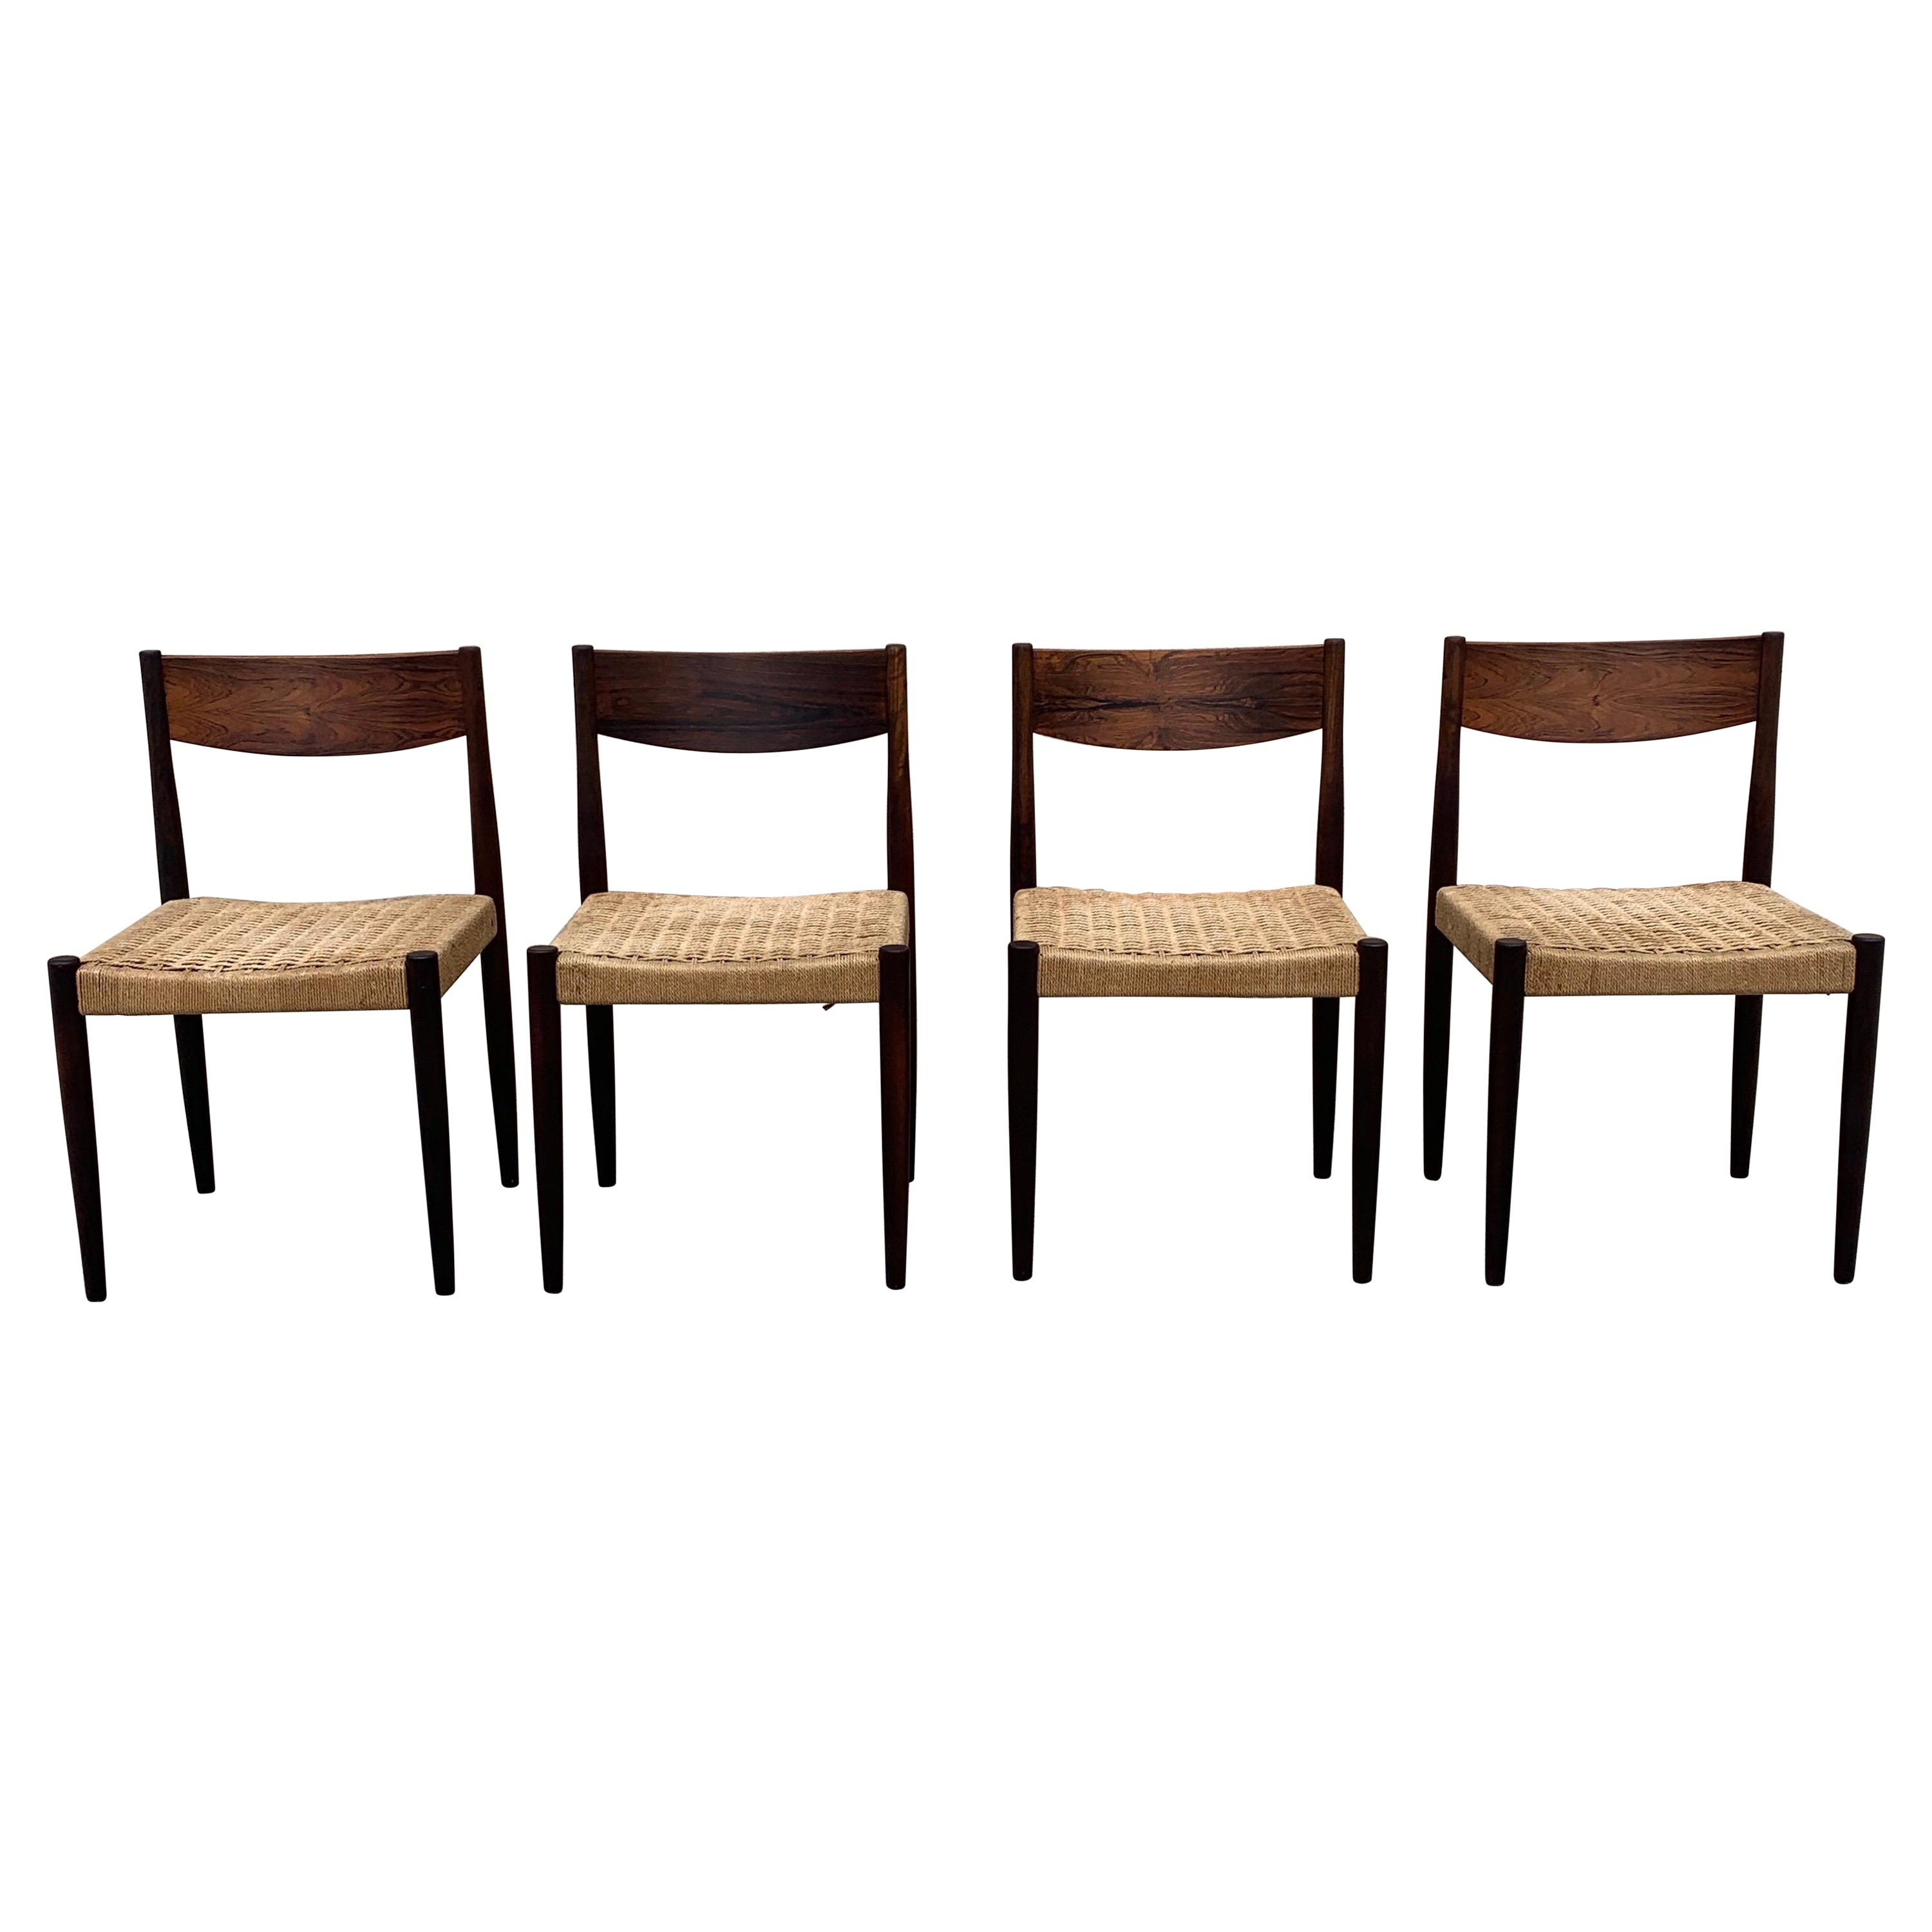 Poul Volther for Frem Rojle Dining Chairs in Rosewood and Danish Cord, set of 4